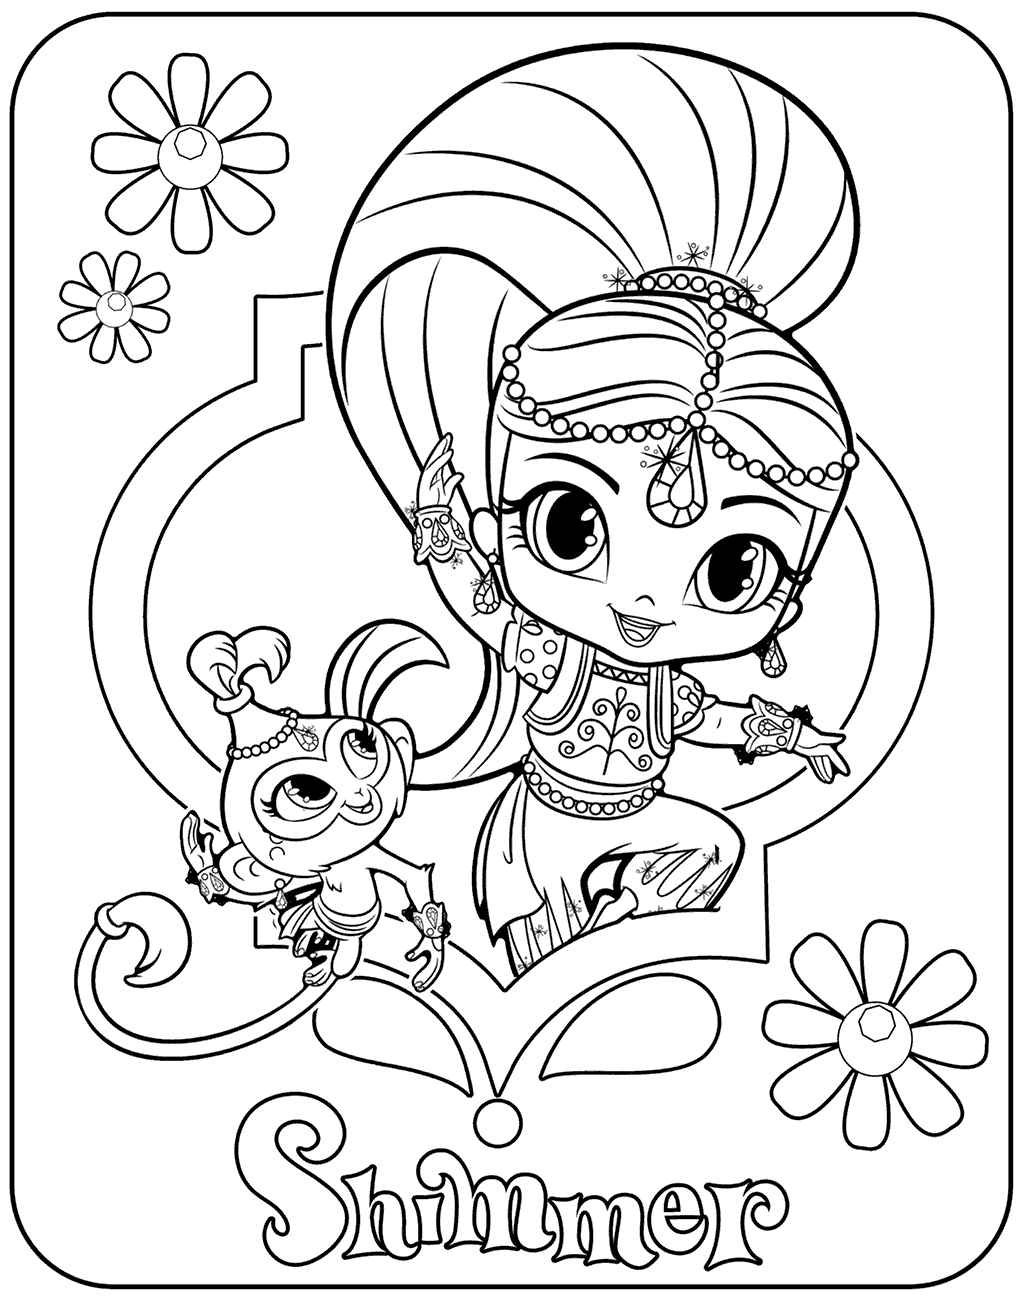 Lovely Shimmer And Tala Coloring Page - Free Printable Coloring Pages